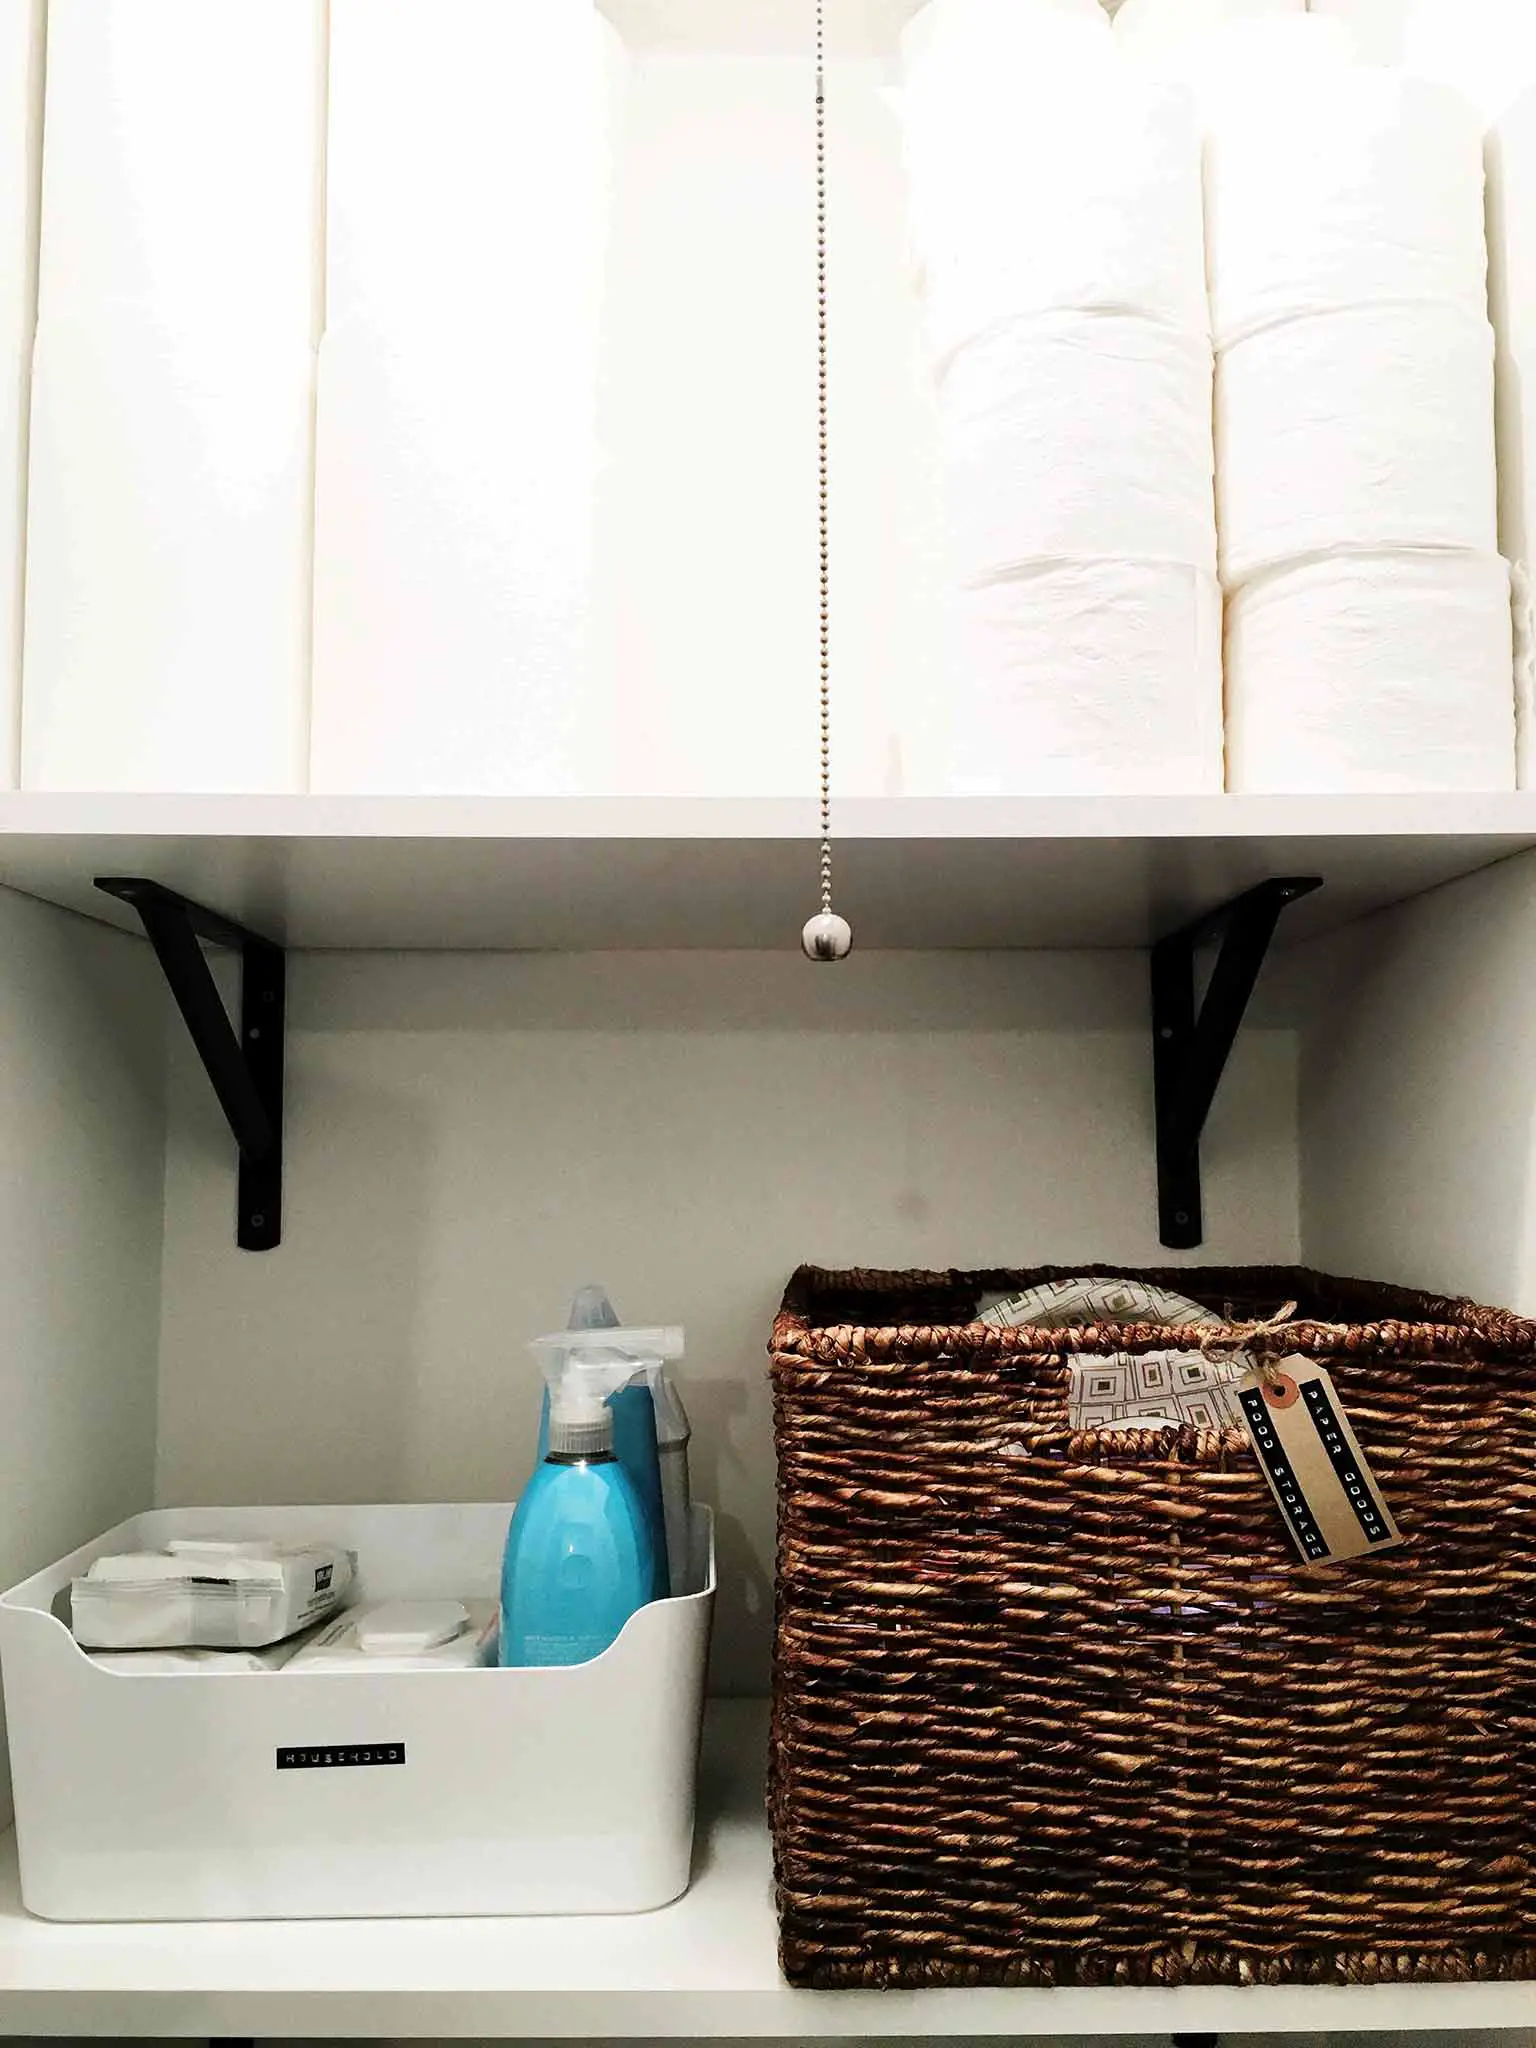 Finished pantry - That Homebird Life Blog